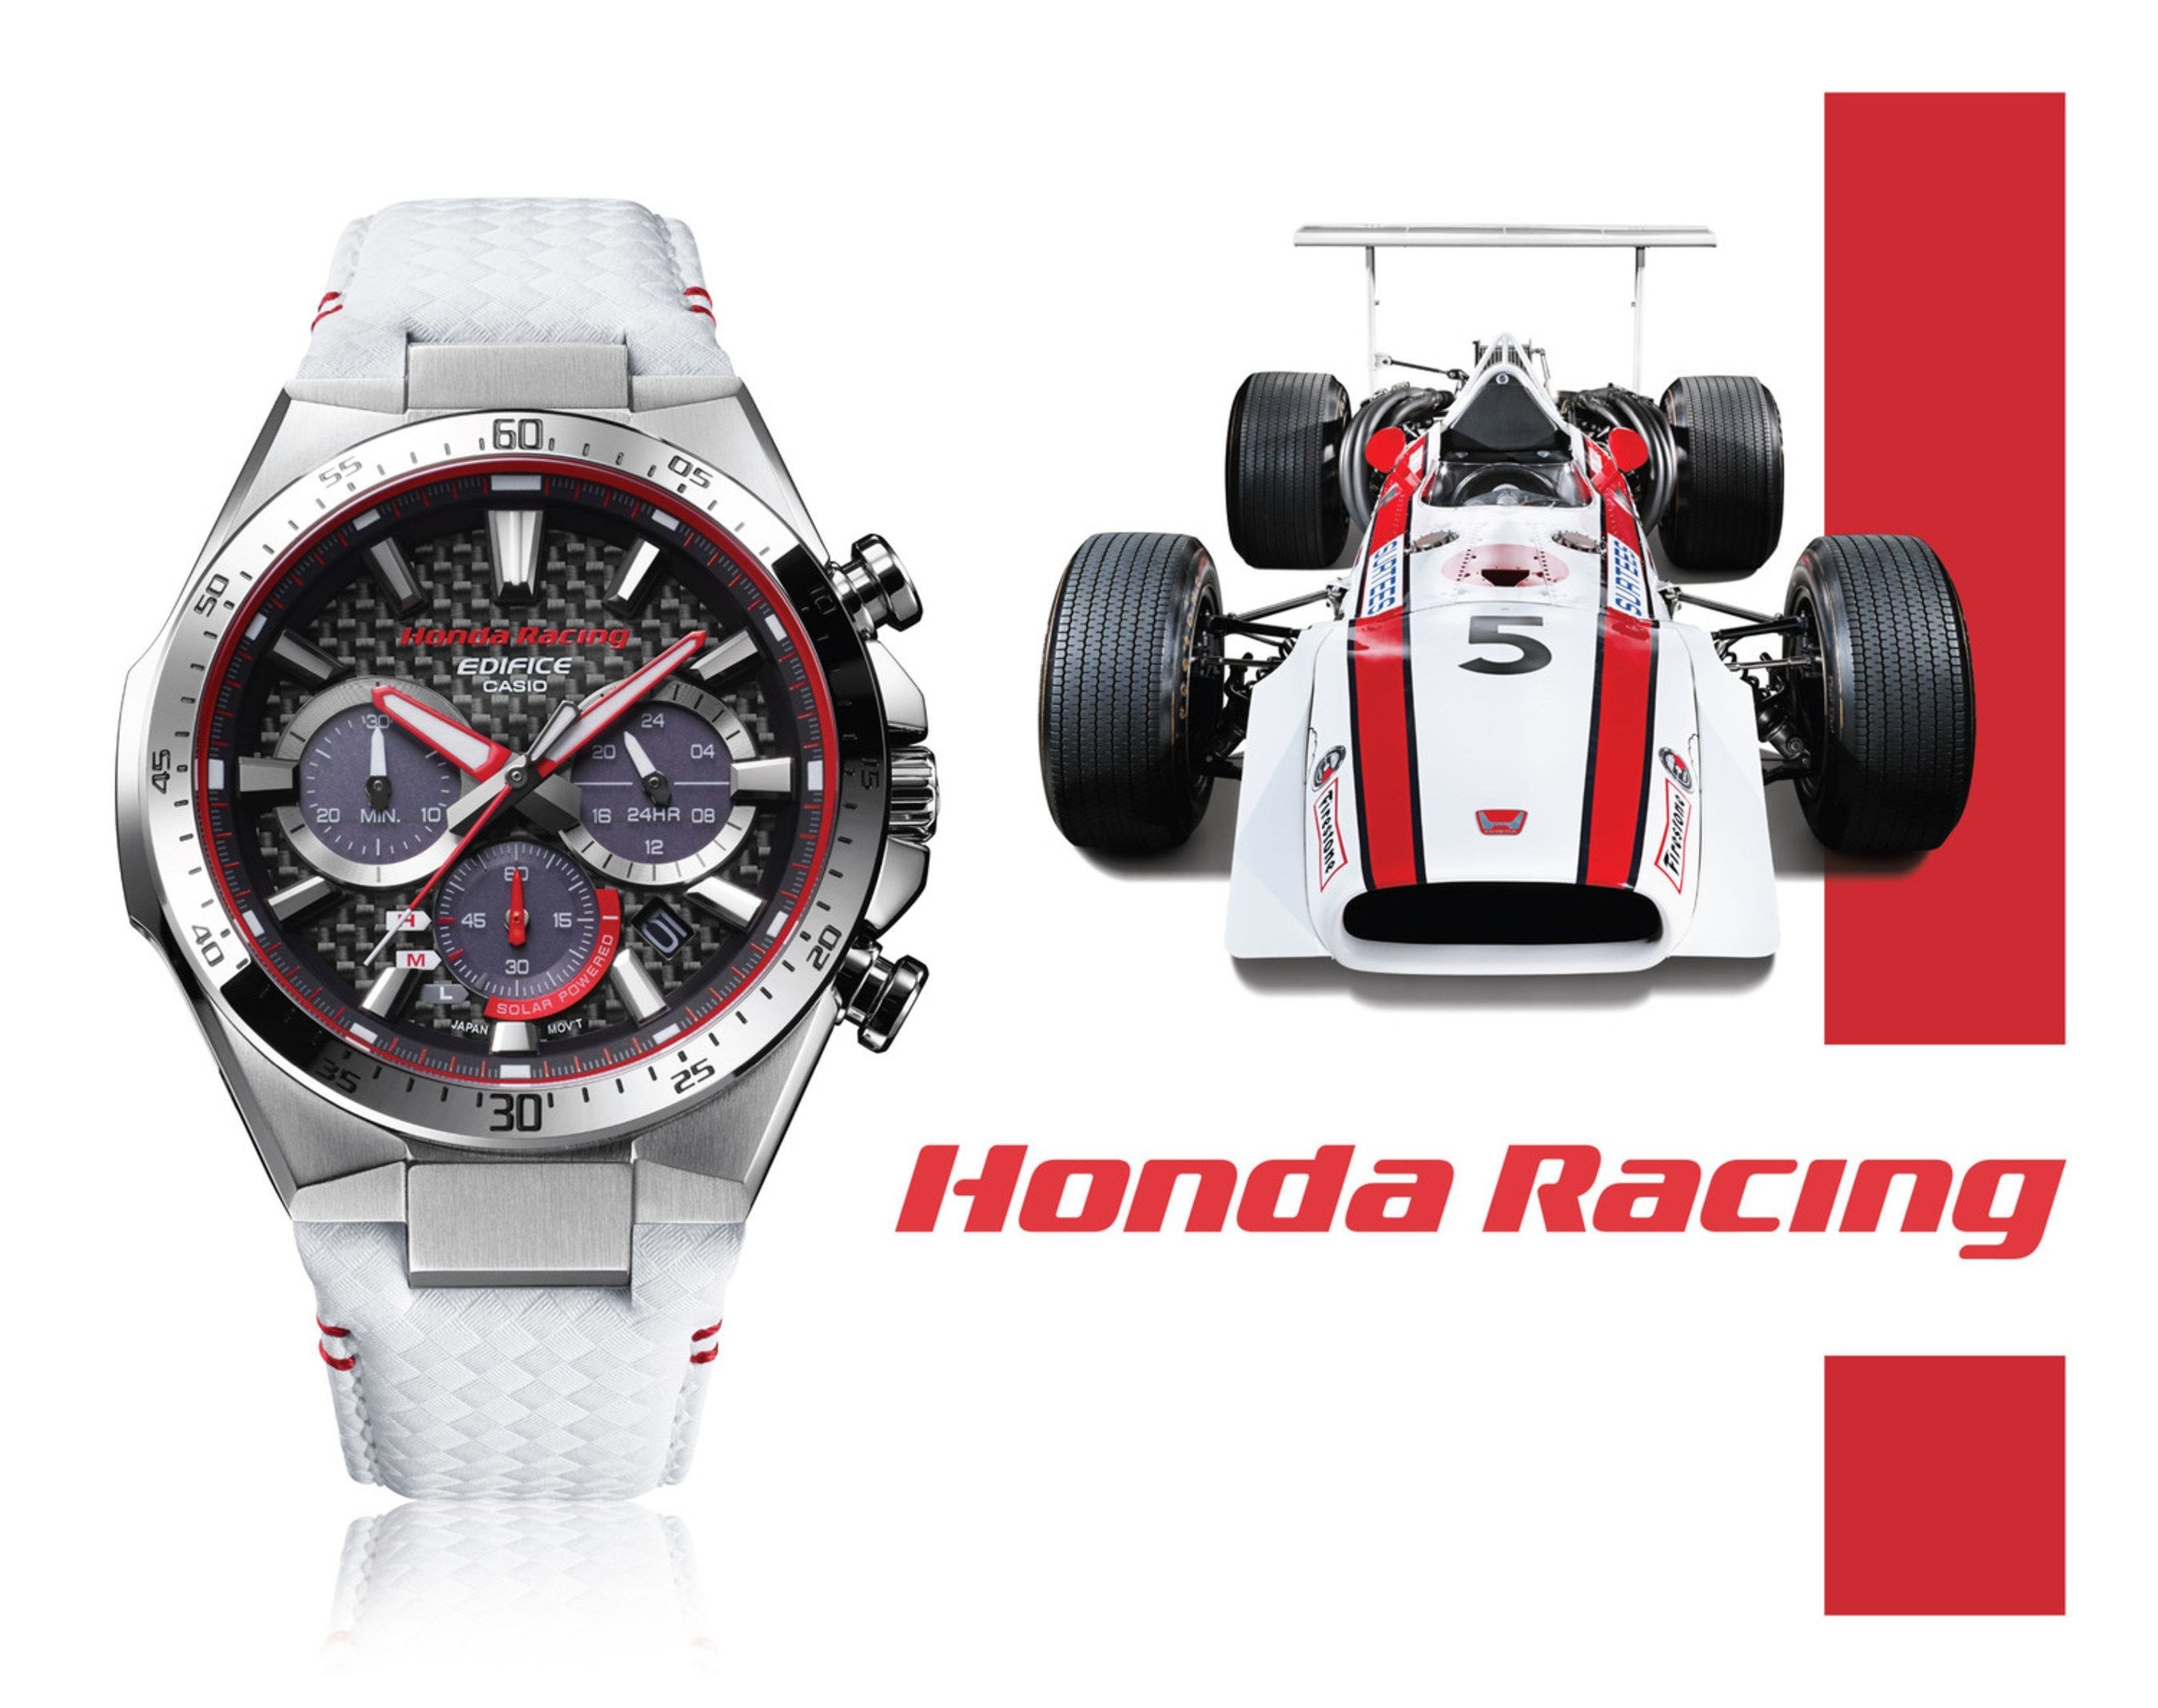 Casio India Launches New Limited Edition EDIFICE Watch in Collaboration With Honda Racing